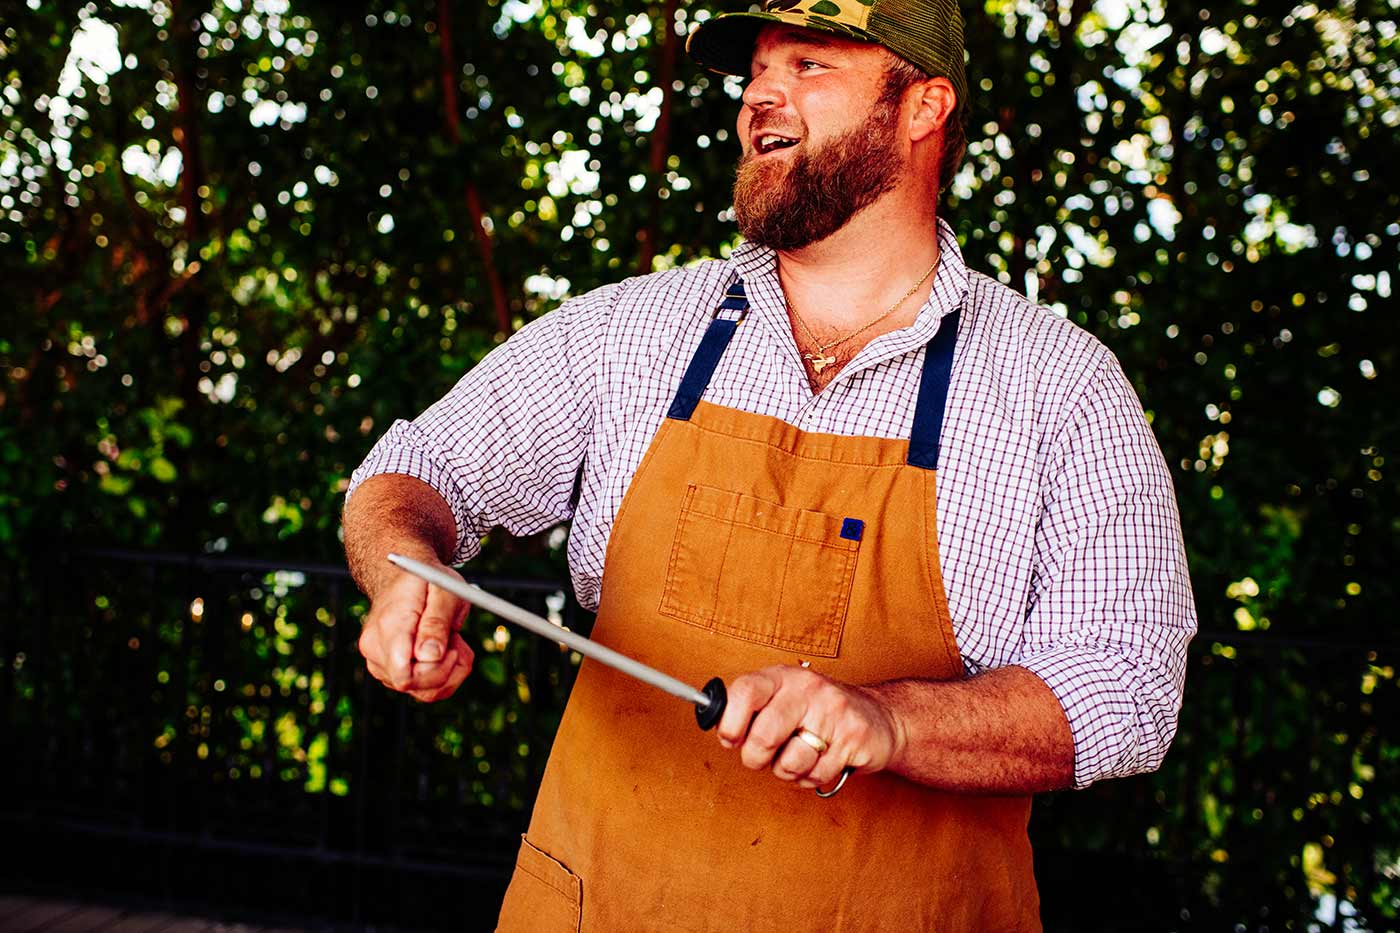 Chef Jean-Paul Bourgeois of Louisiana sharpens his knives